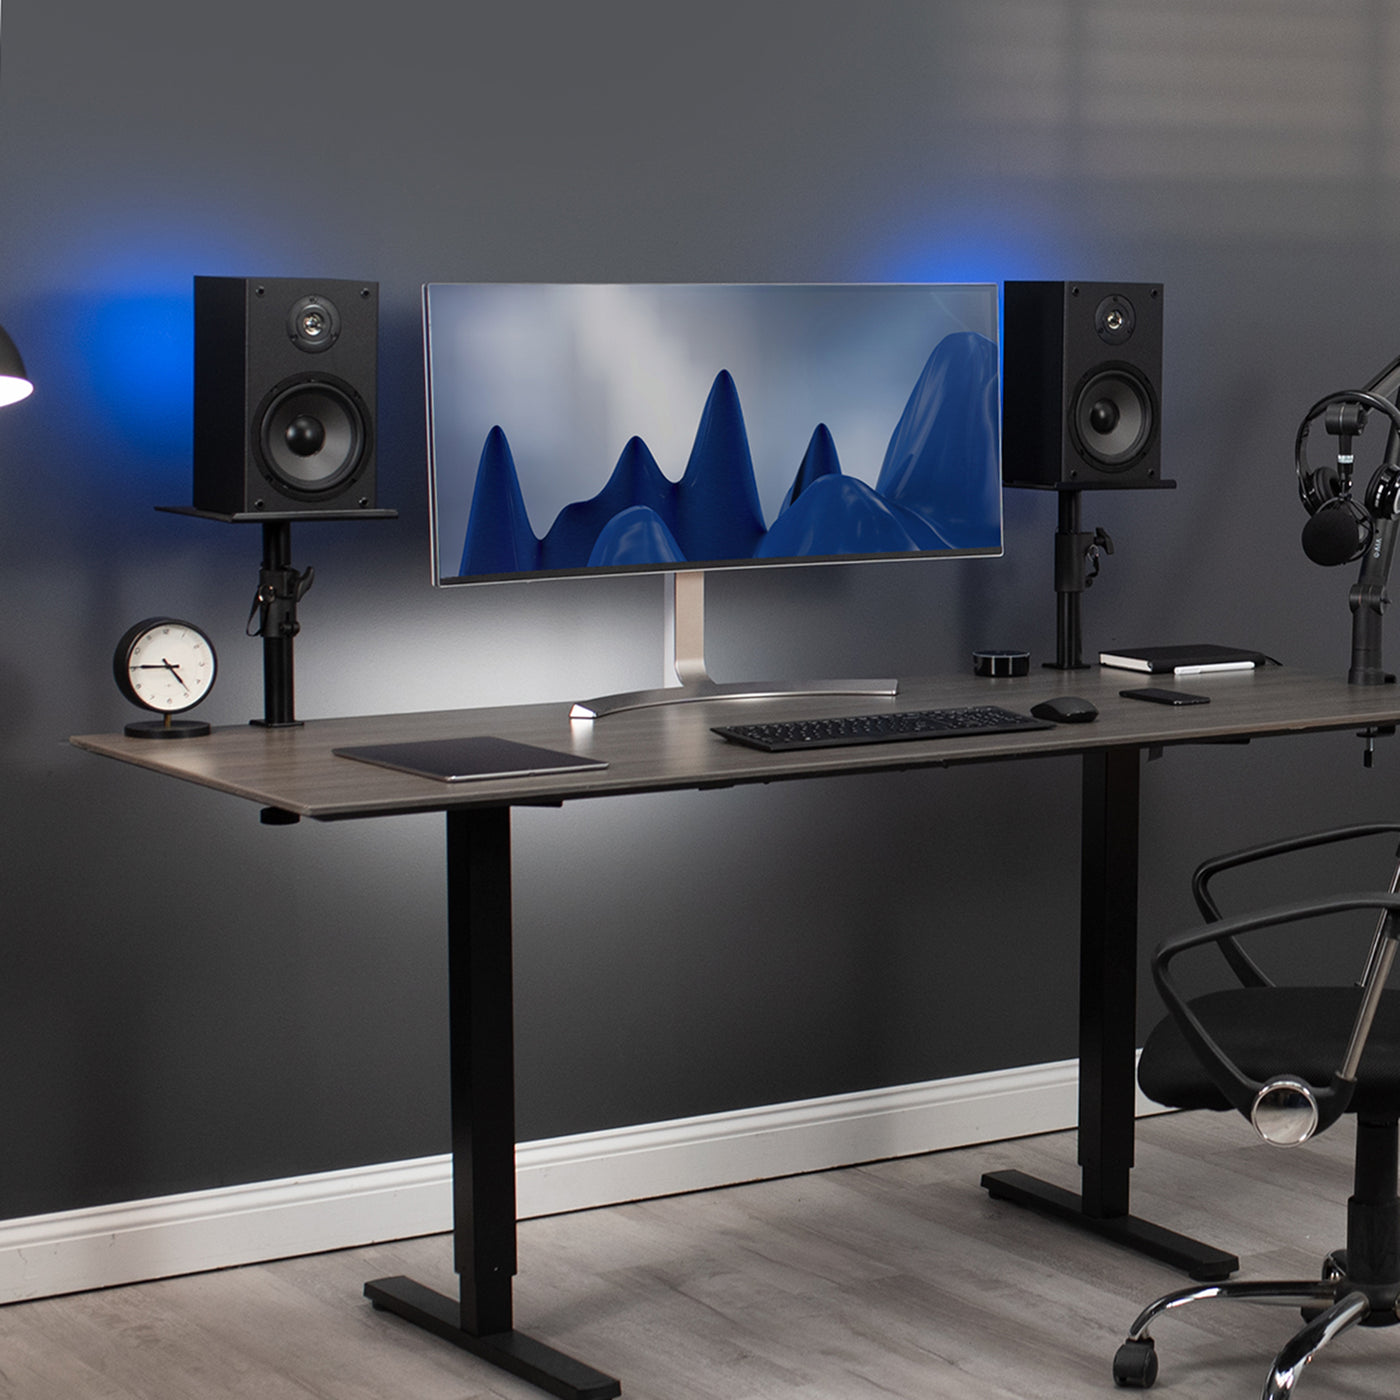 Modern clamp-on speaker stands on both sides of a large monitor.